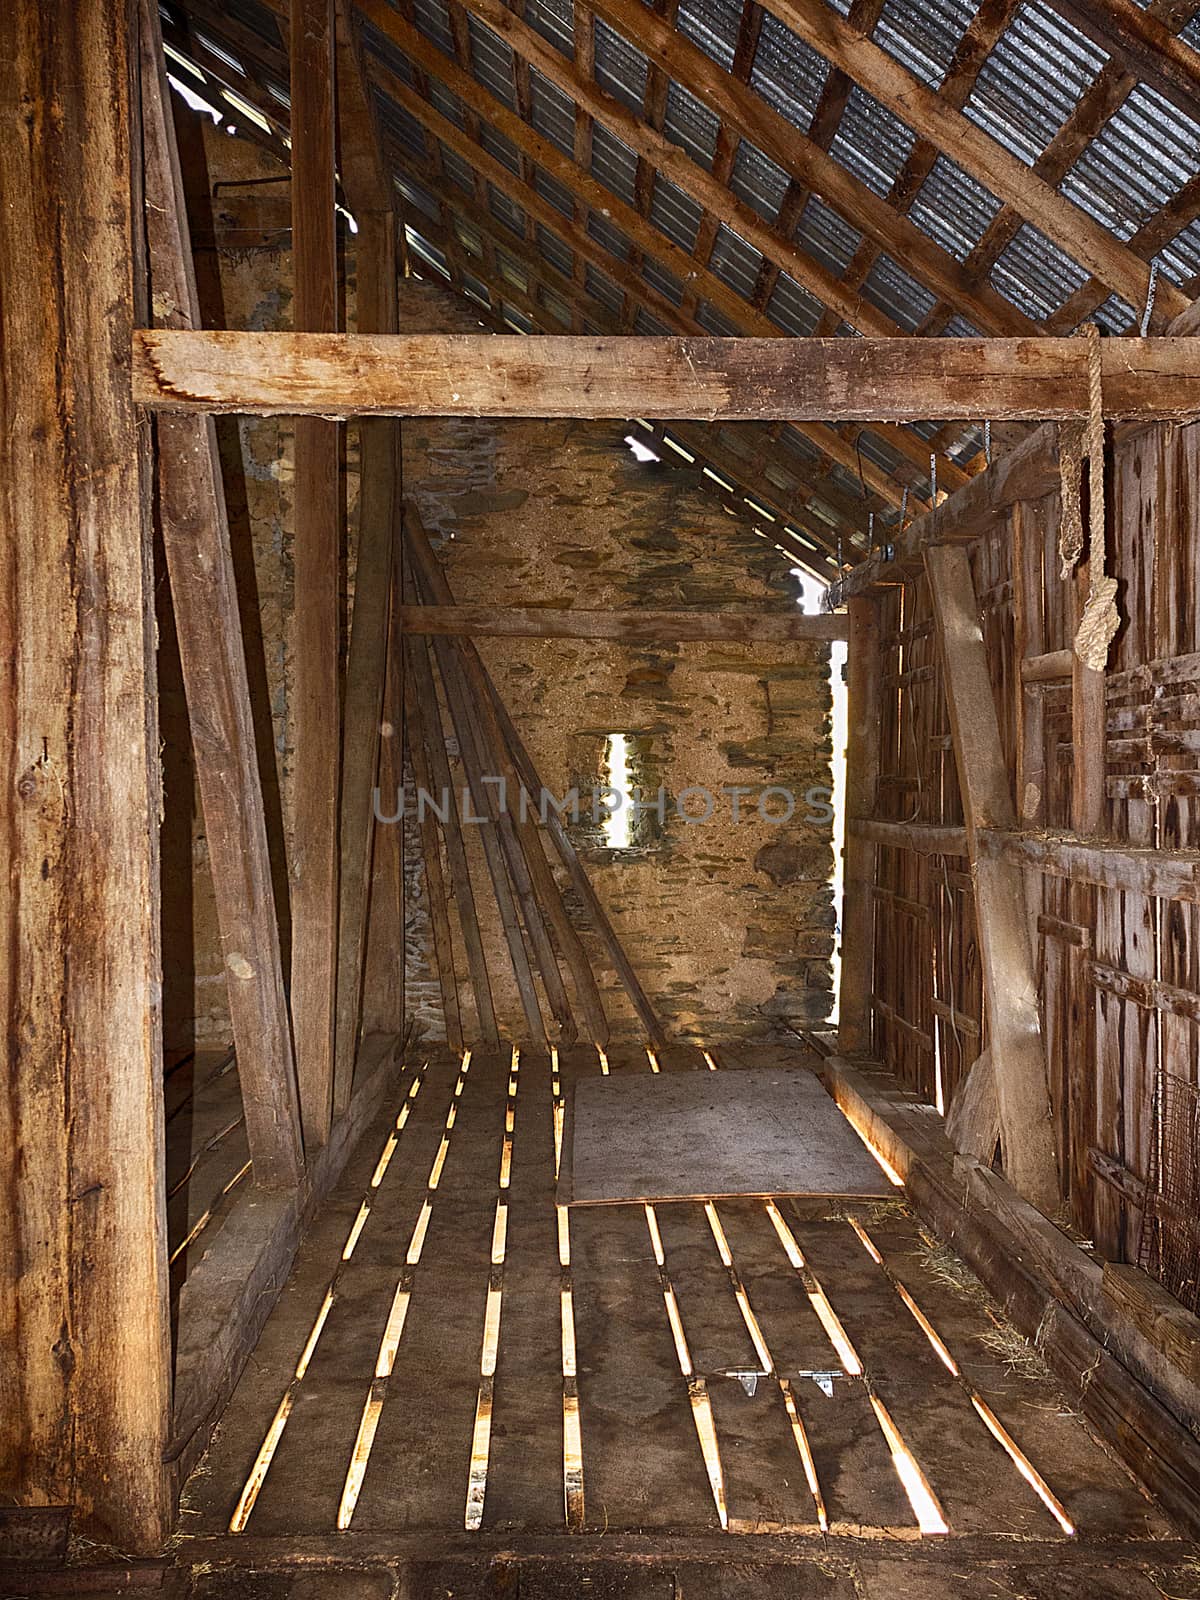 Interior view of old bank barn with stone walls